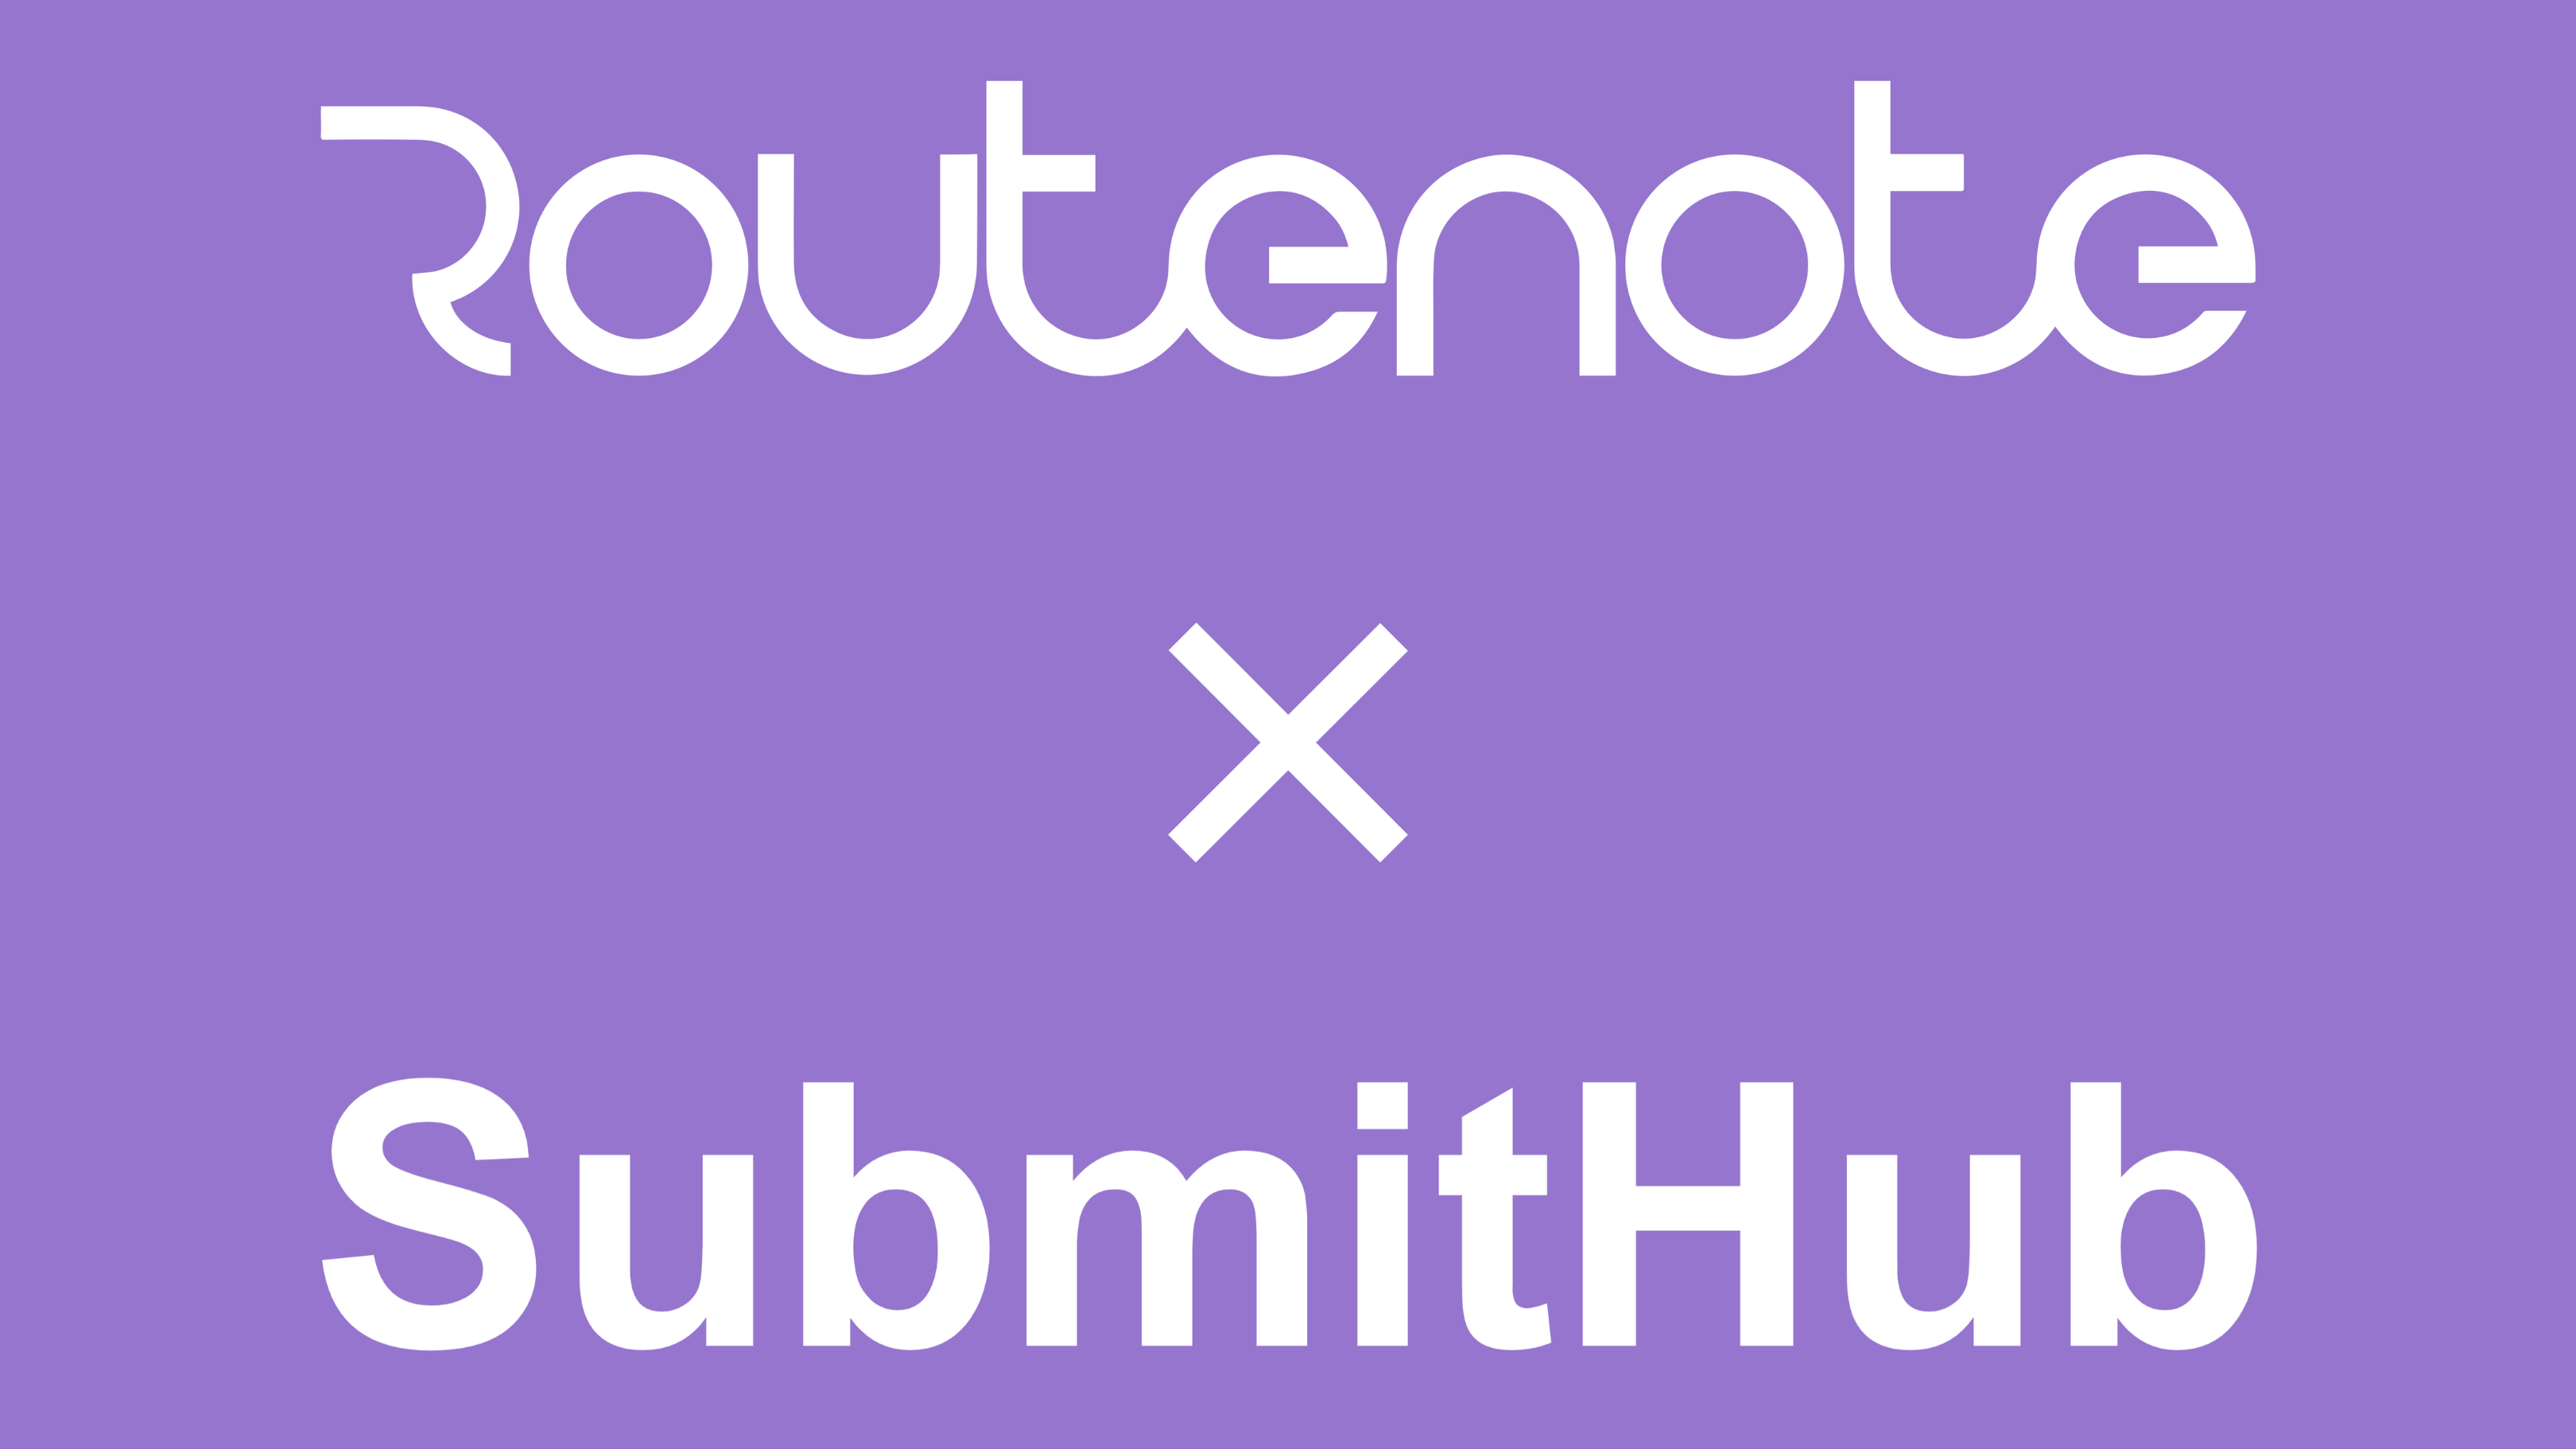 What is SubmitHub? RouteNote artists get 20% off!